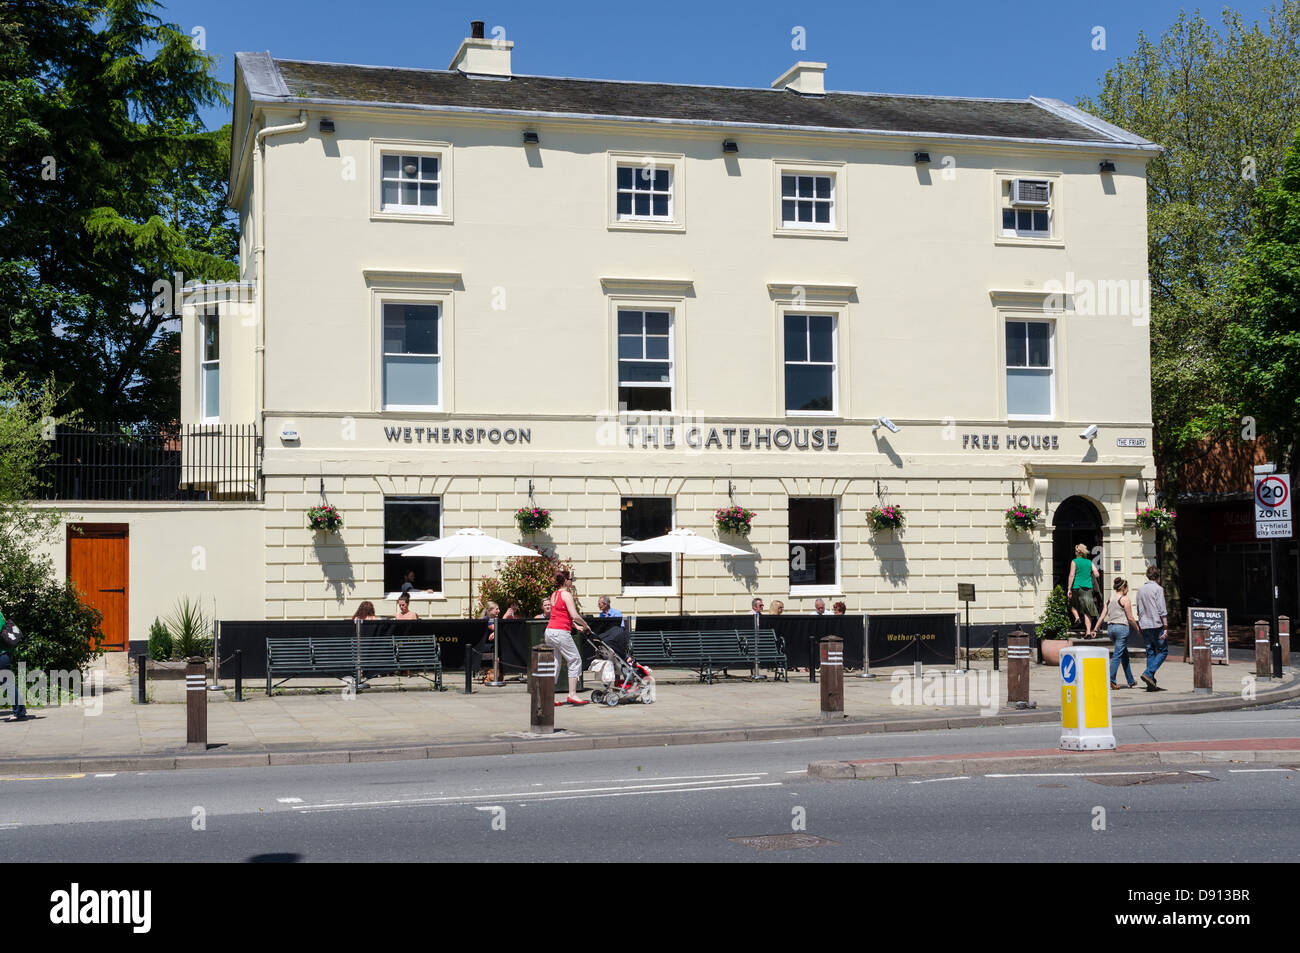 The Gatehouse, a Weatherspoon pub in Lichfield, Staffordshire Stock Photo